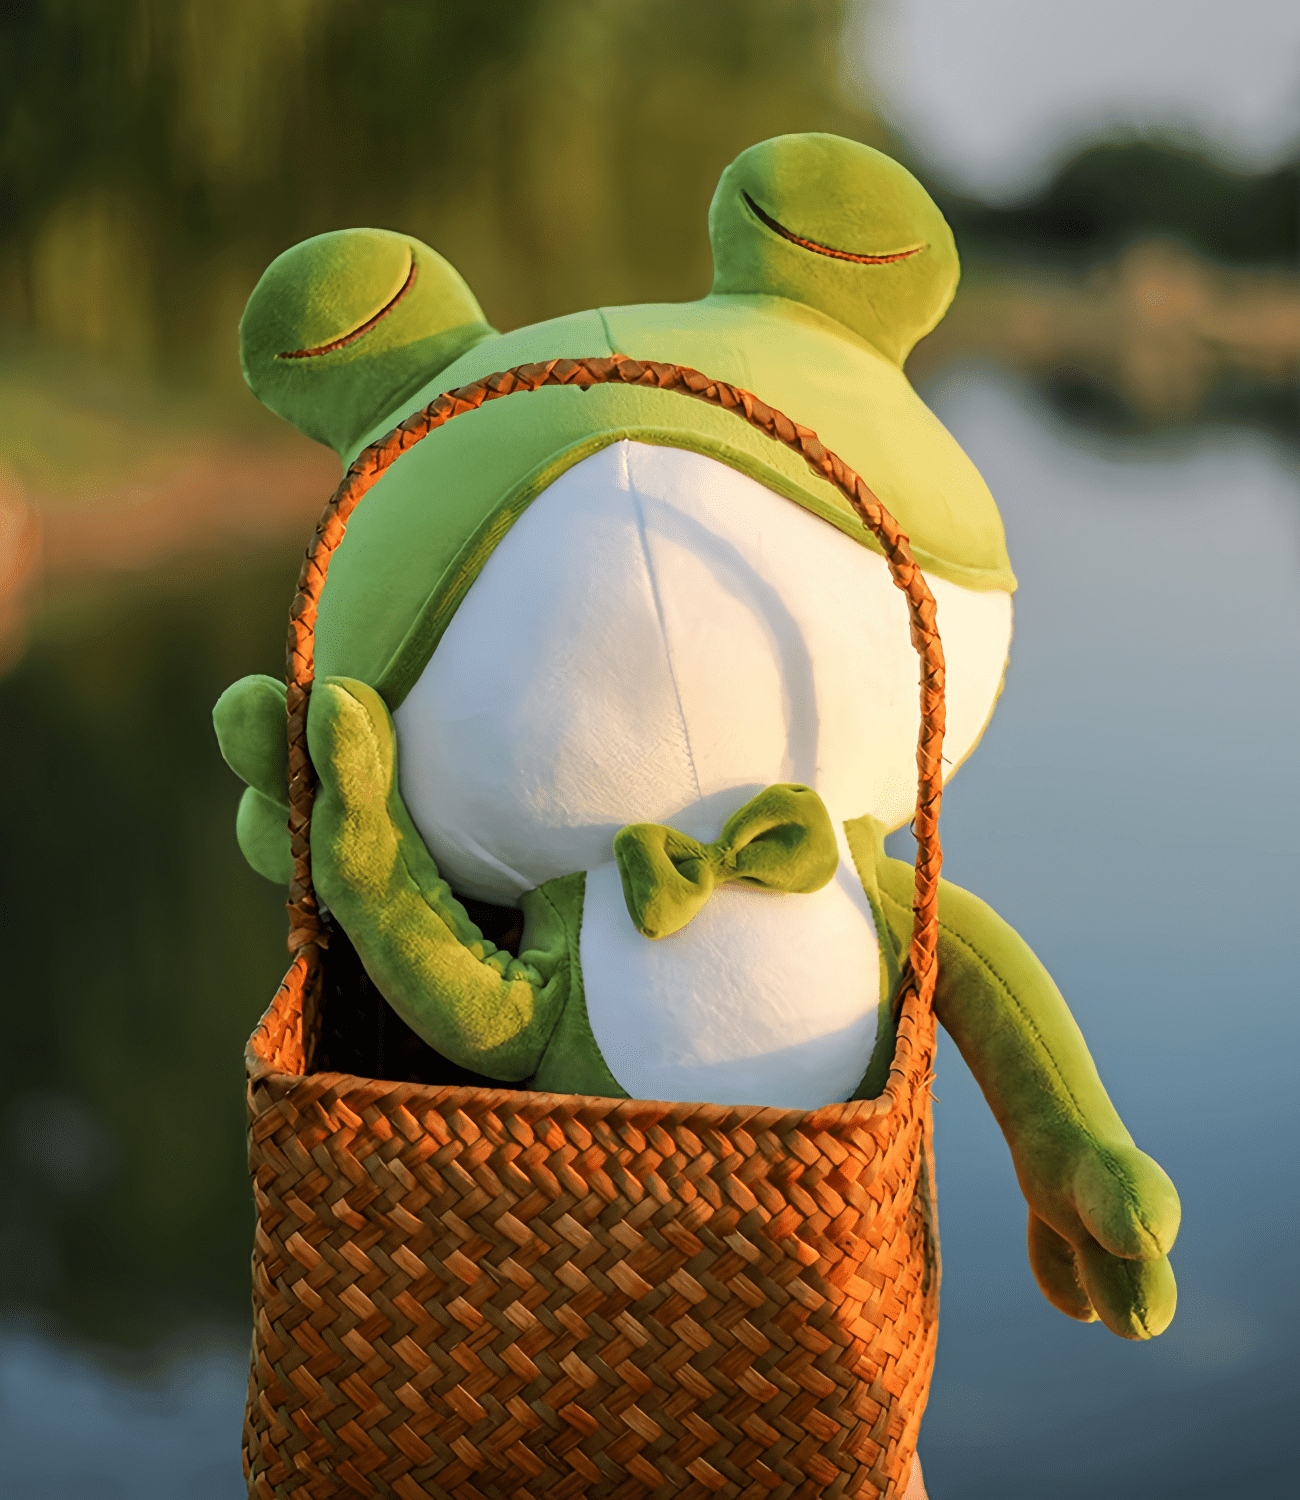 🛒 Frog carrying a shopping basket, ready for exciting adventures.